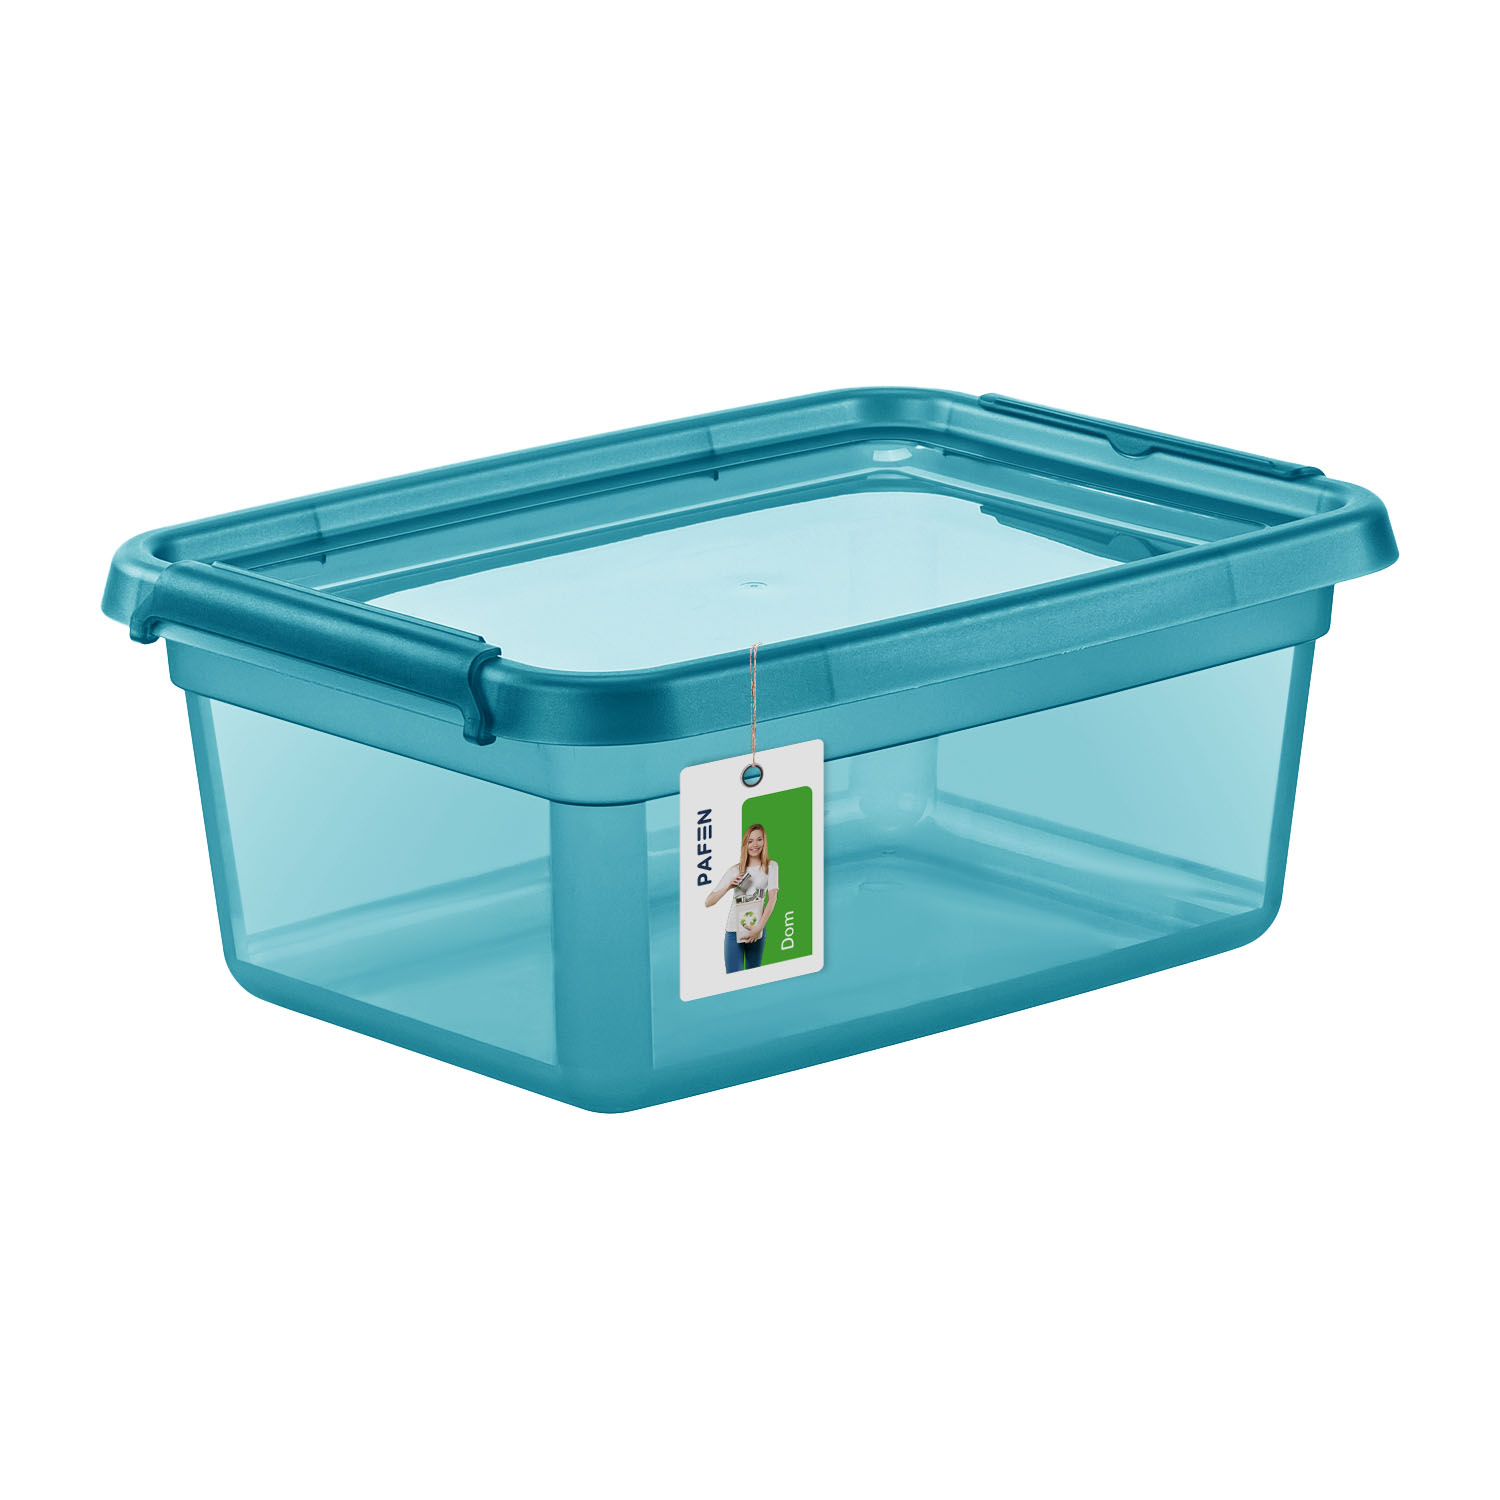 BaseStore Color 2522 Transparent cyan storage container